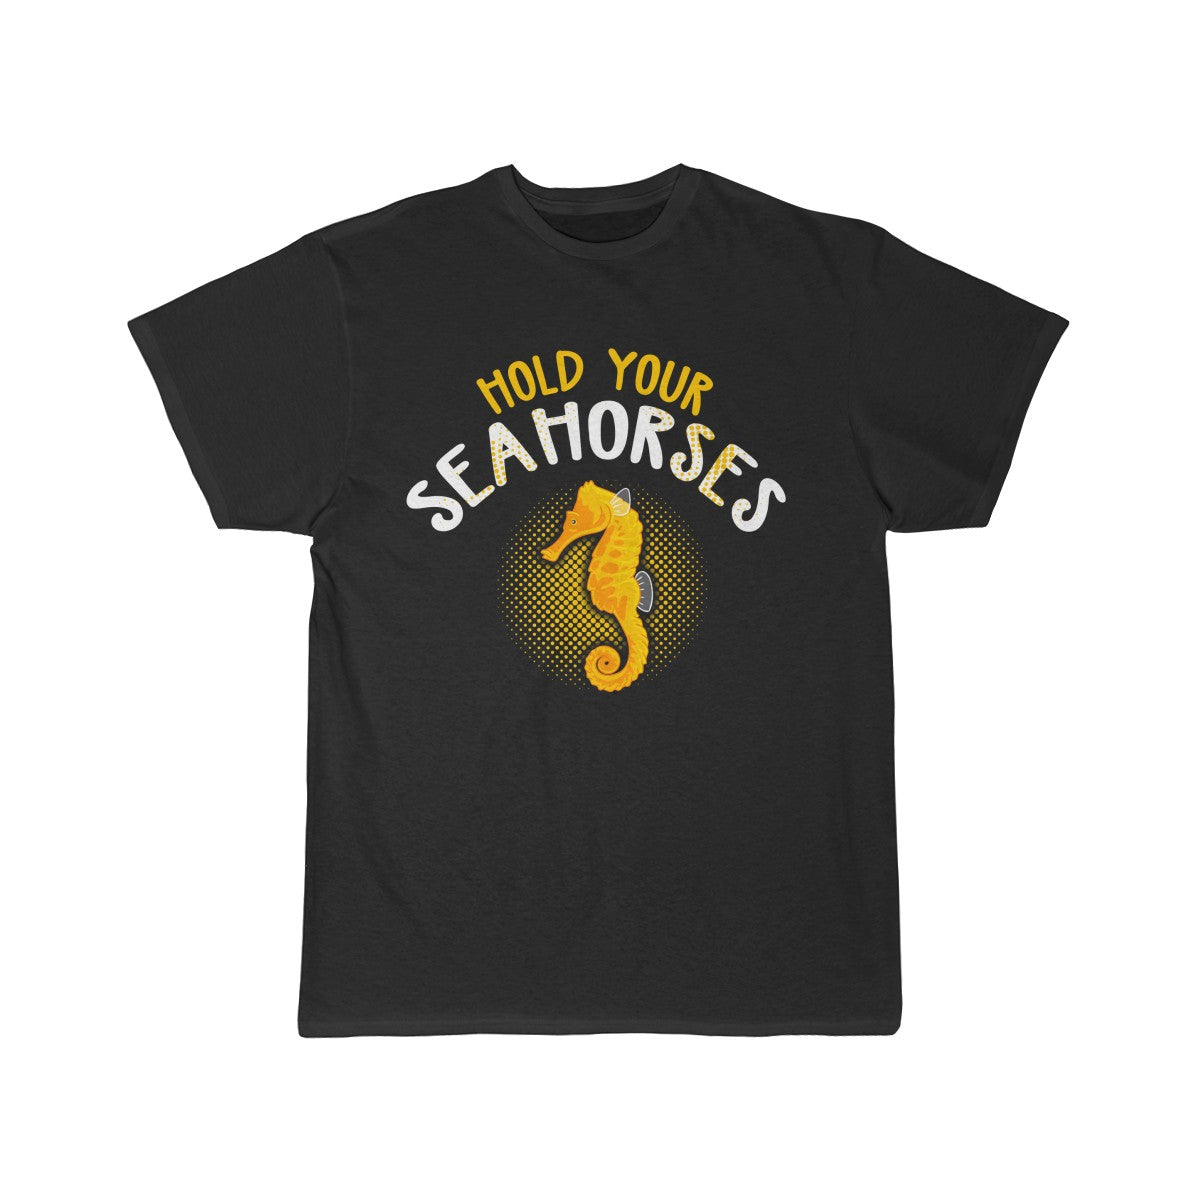 Hold Your Seahorses Men's Tee